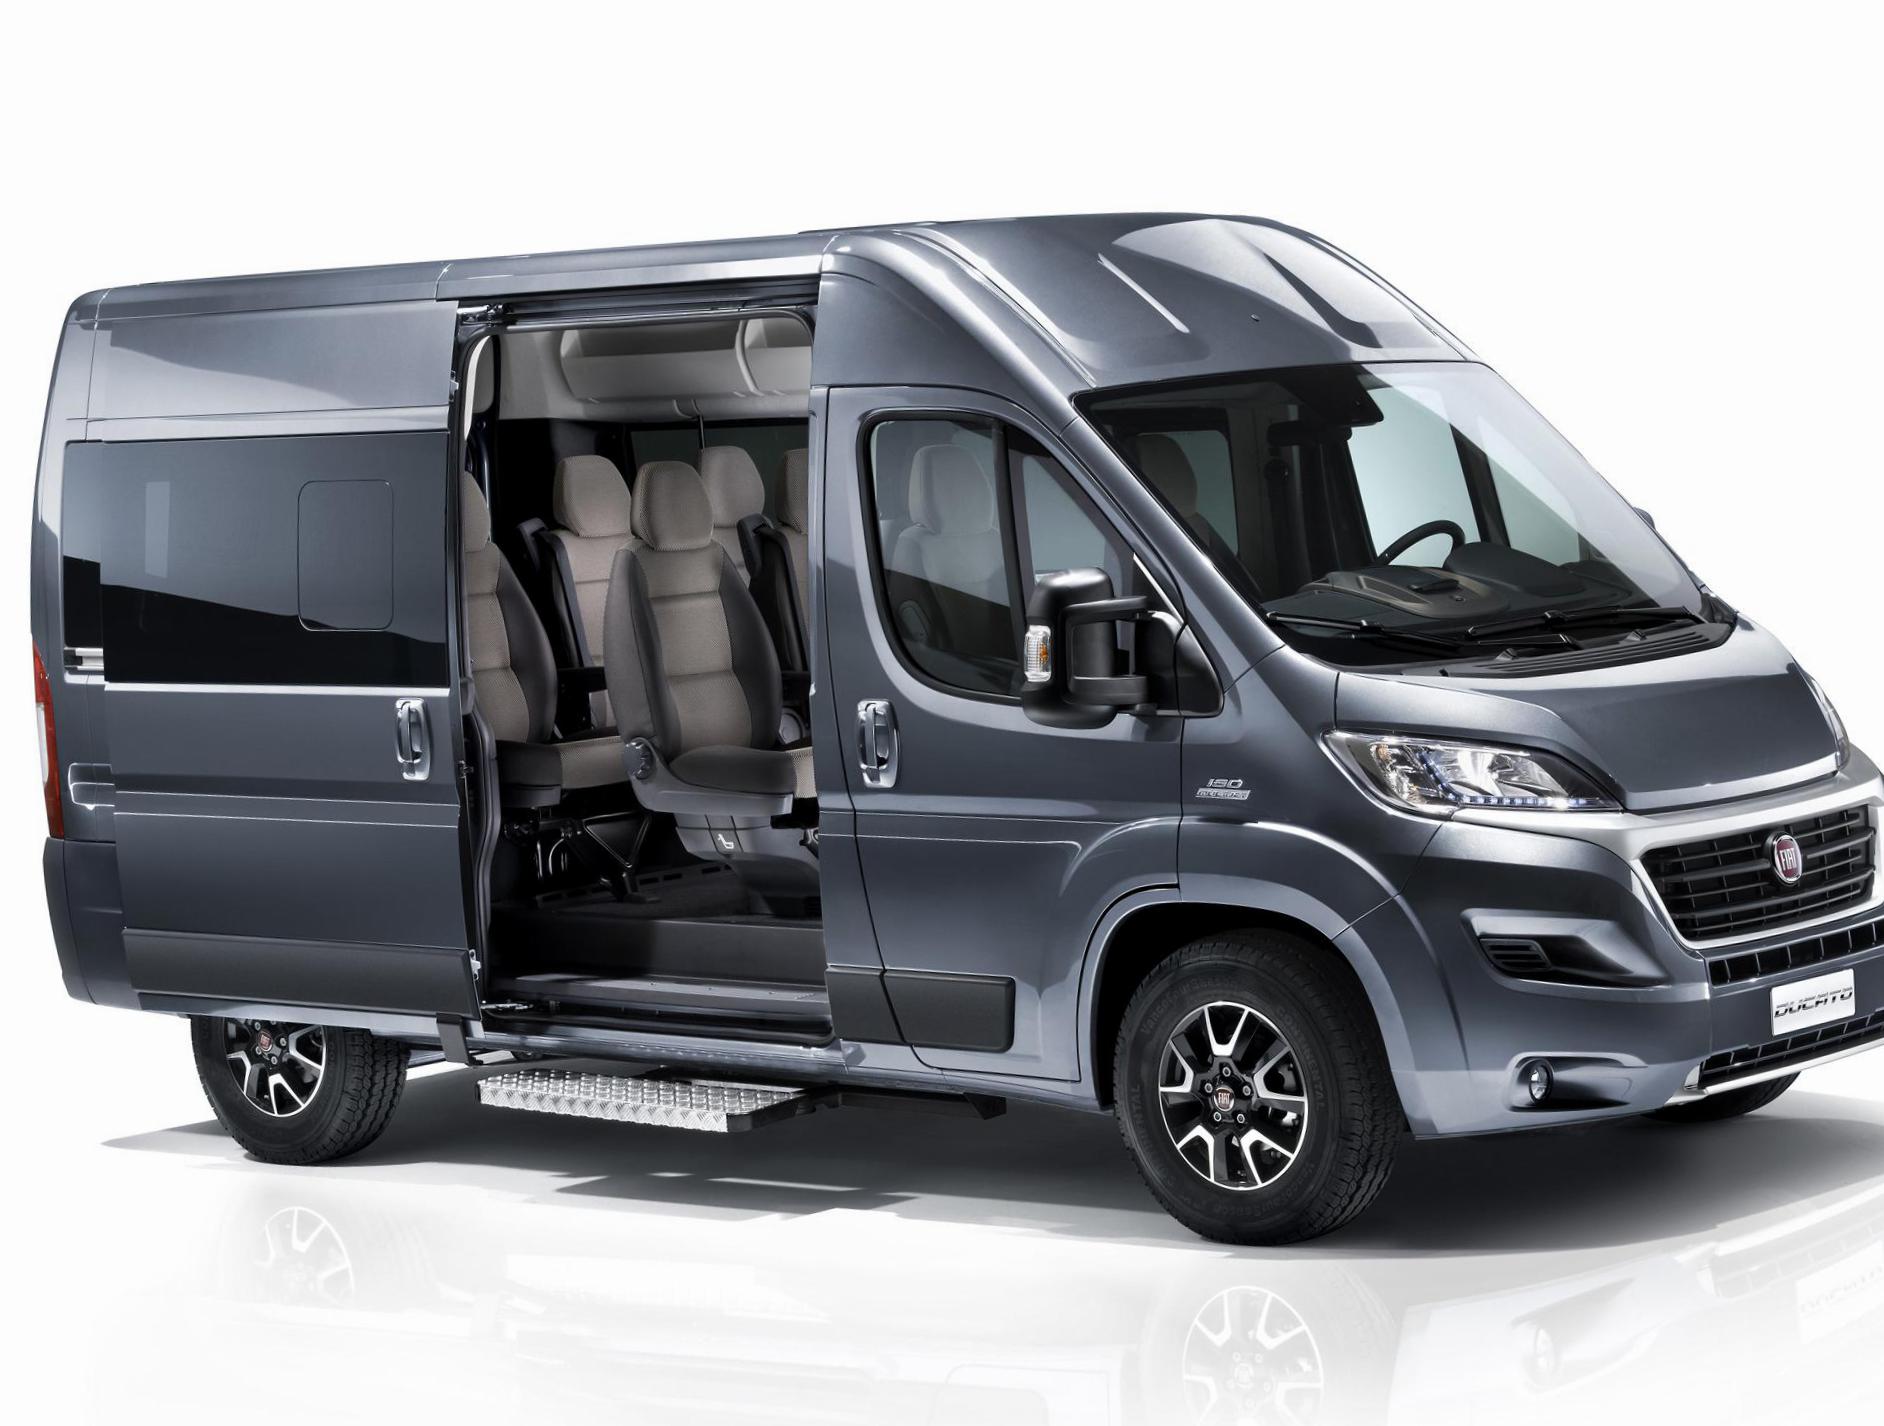 Ducato Panorama Fiat approved hatchback